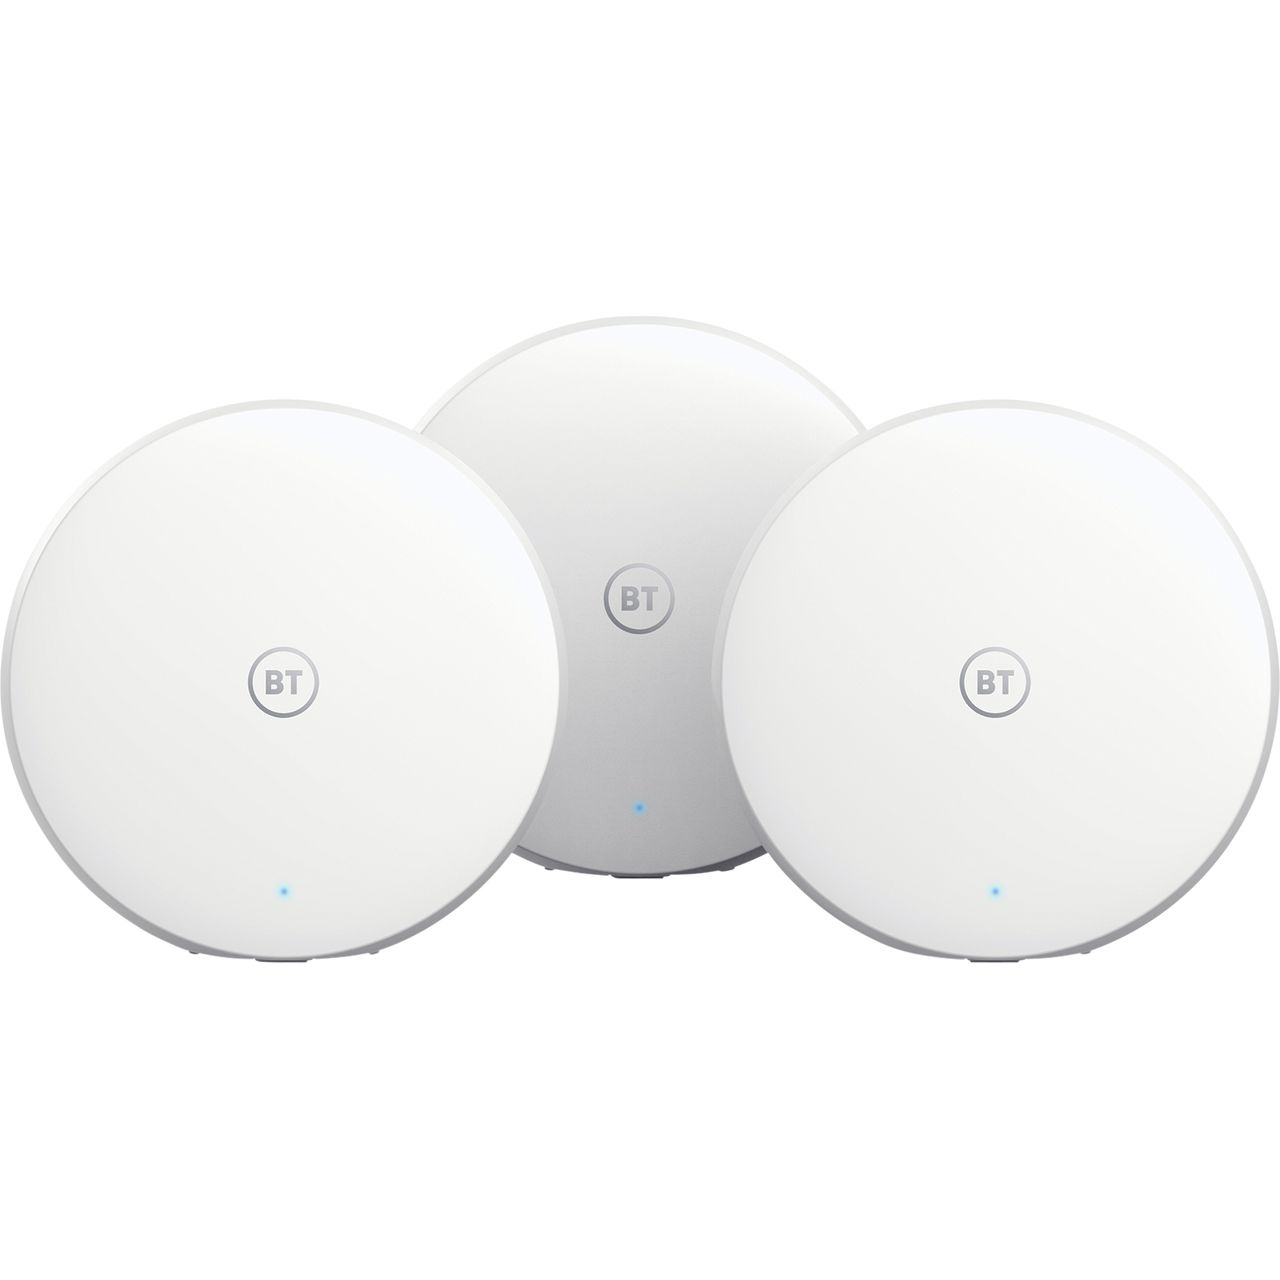 BT Mini Whole Home WiFi (3-Pack) for Mesh Network Review